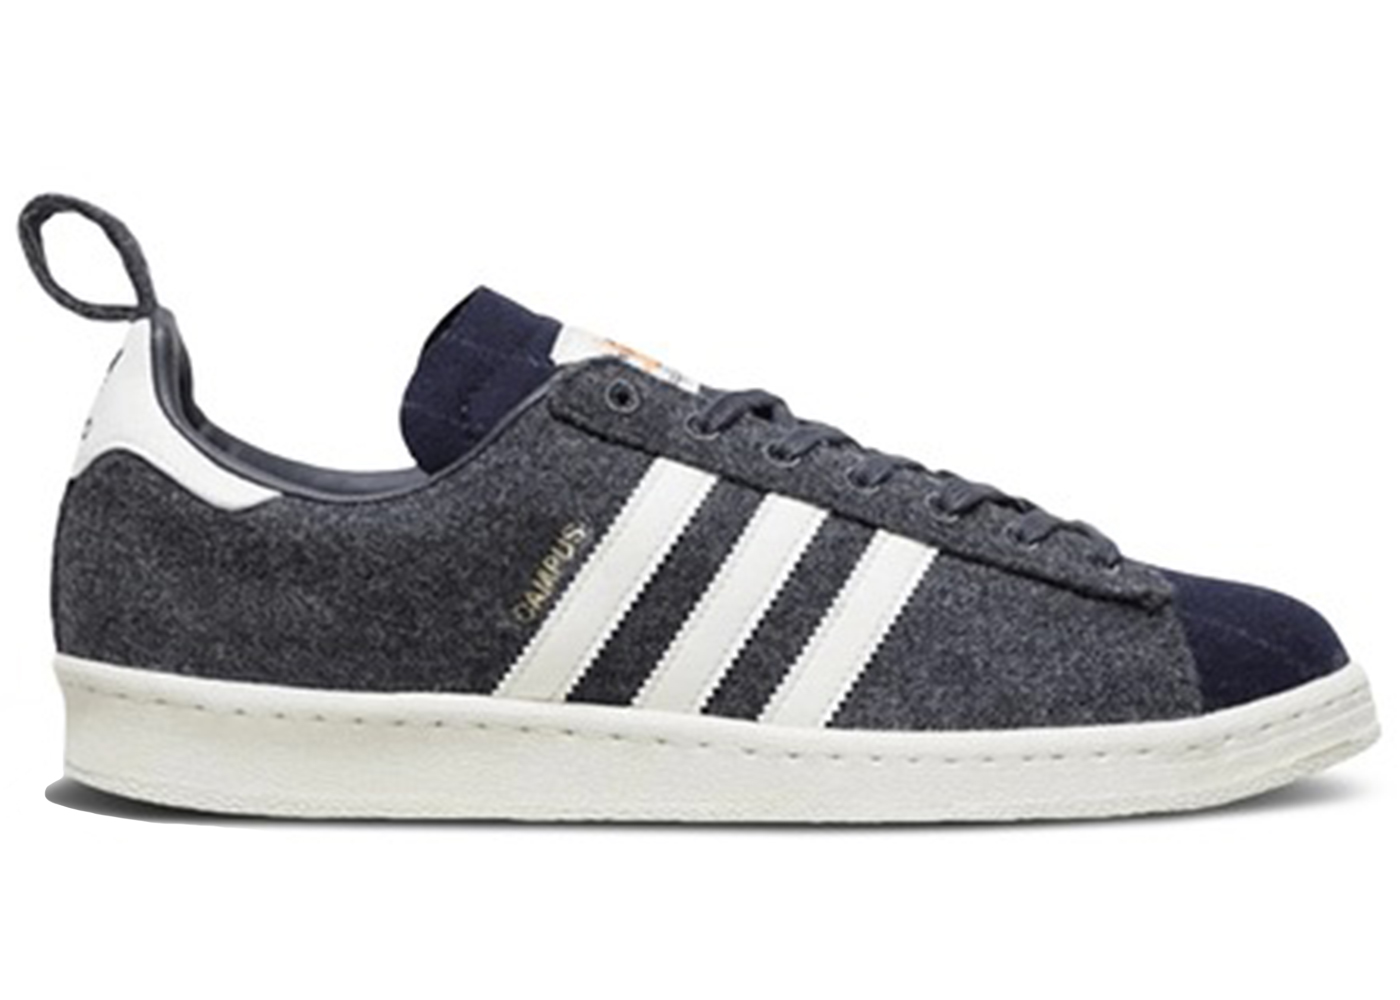 adidas Campus 80s size? Exclusive Fox Brothers メンズ - FV5265 - JP